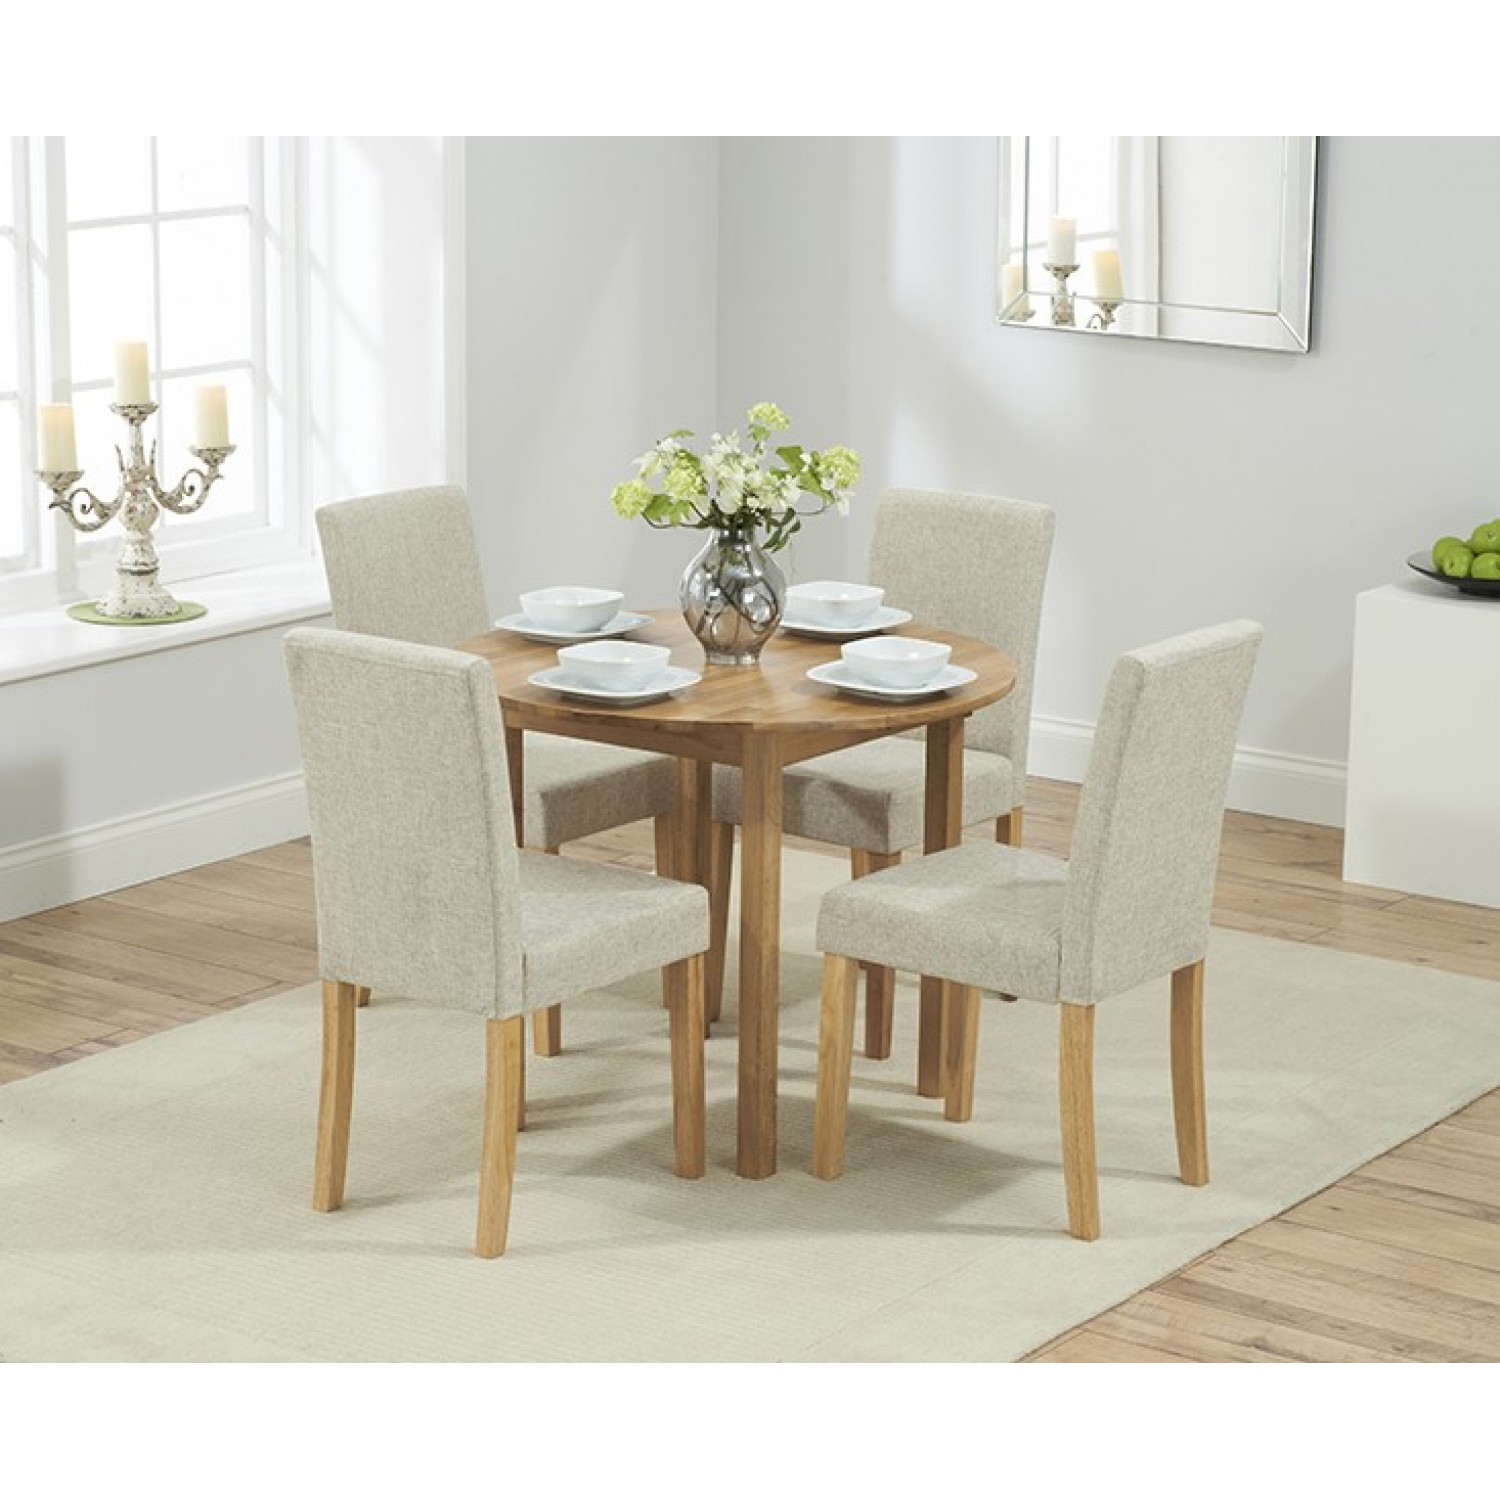 Promo Oak Round Extending Table And Cream Maiya Chairs Oak